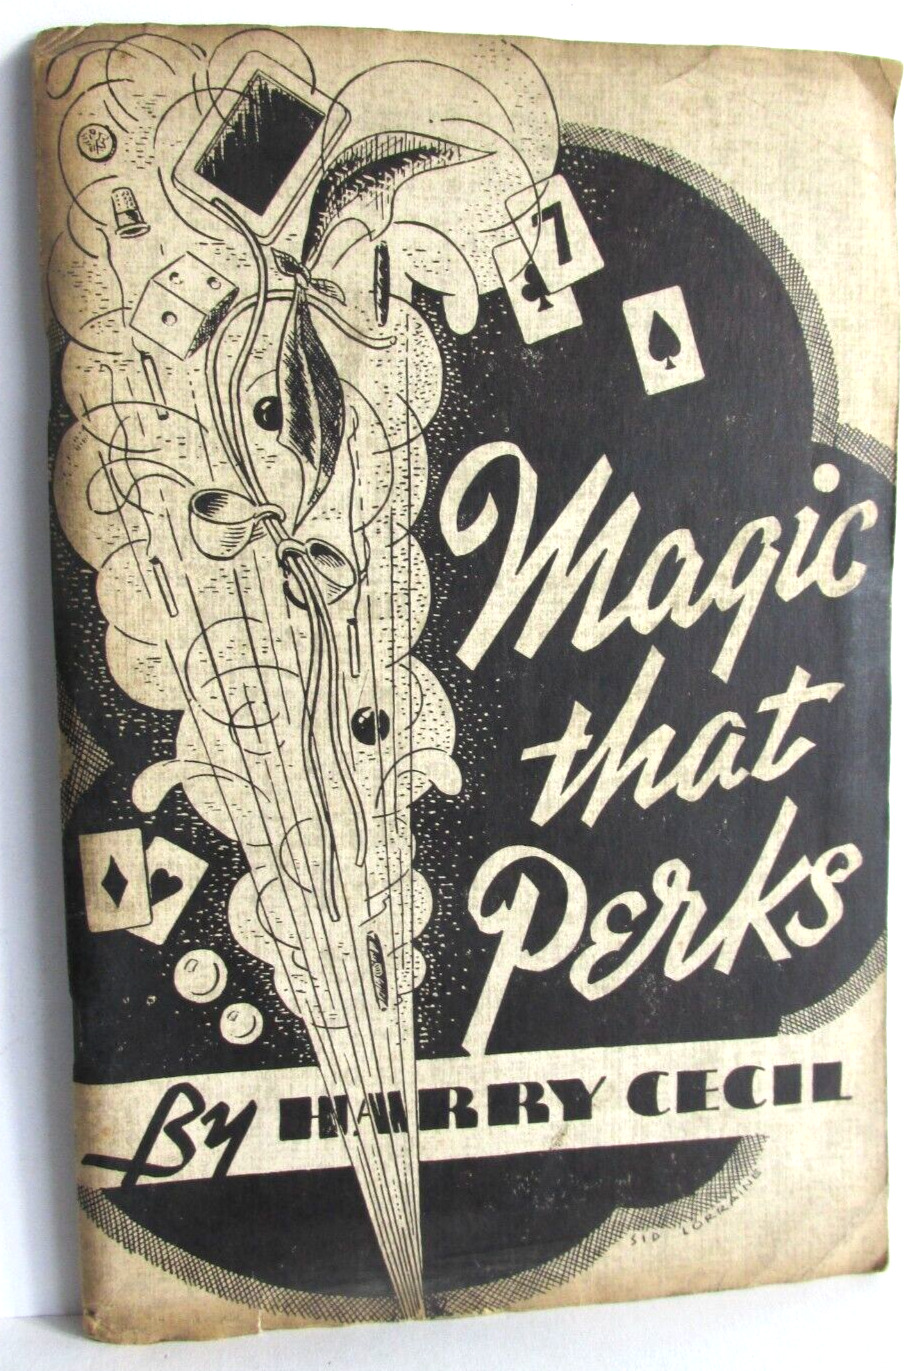 1937 Magic Book, Magic That Perks By Harry Cecil Signed By Author with drawing